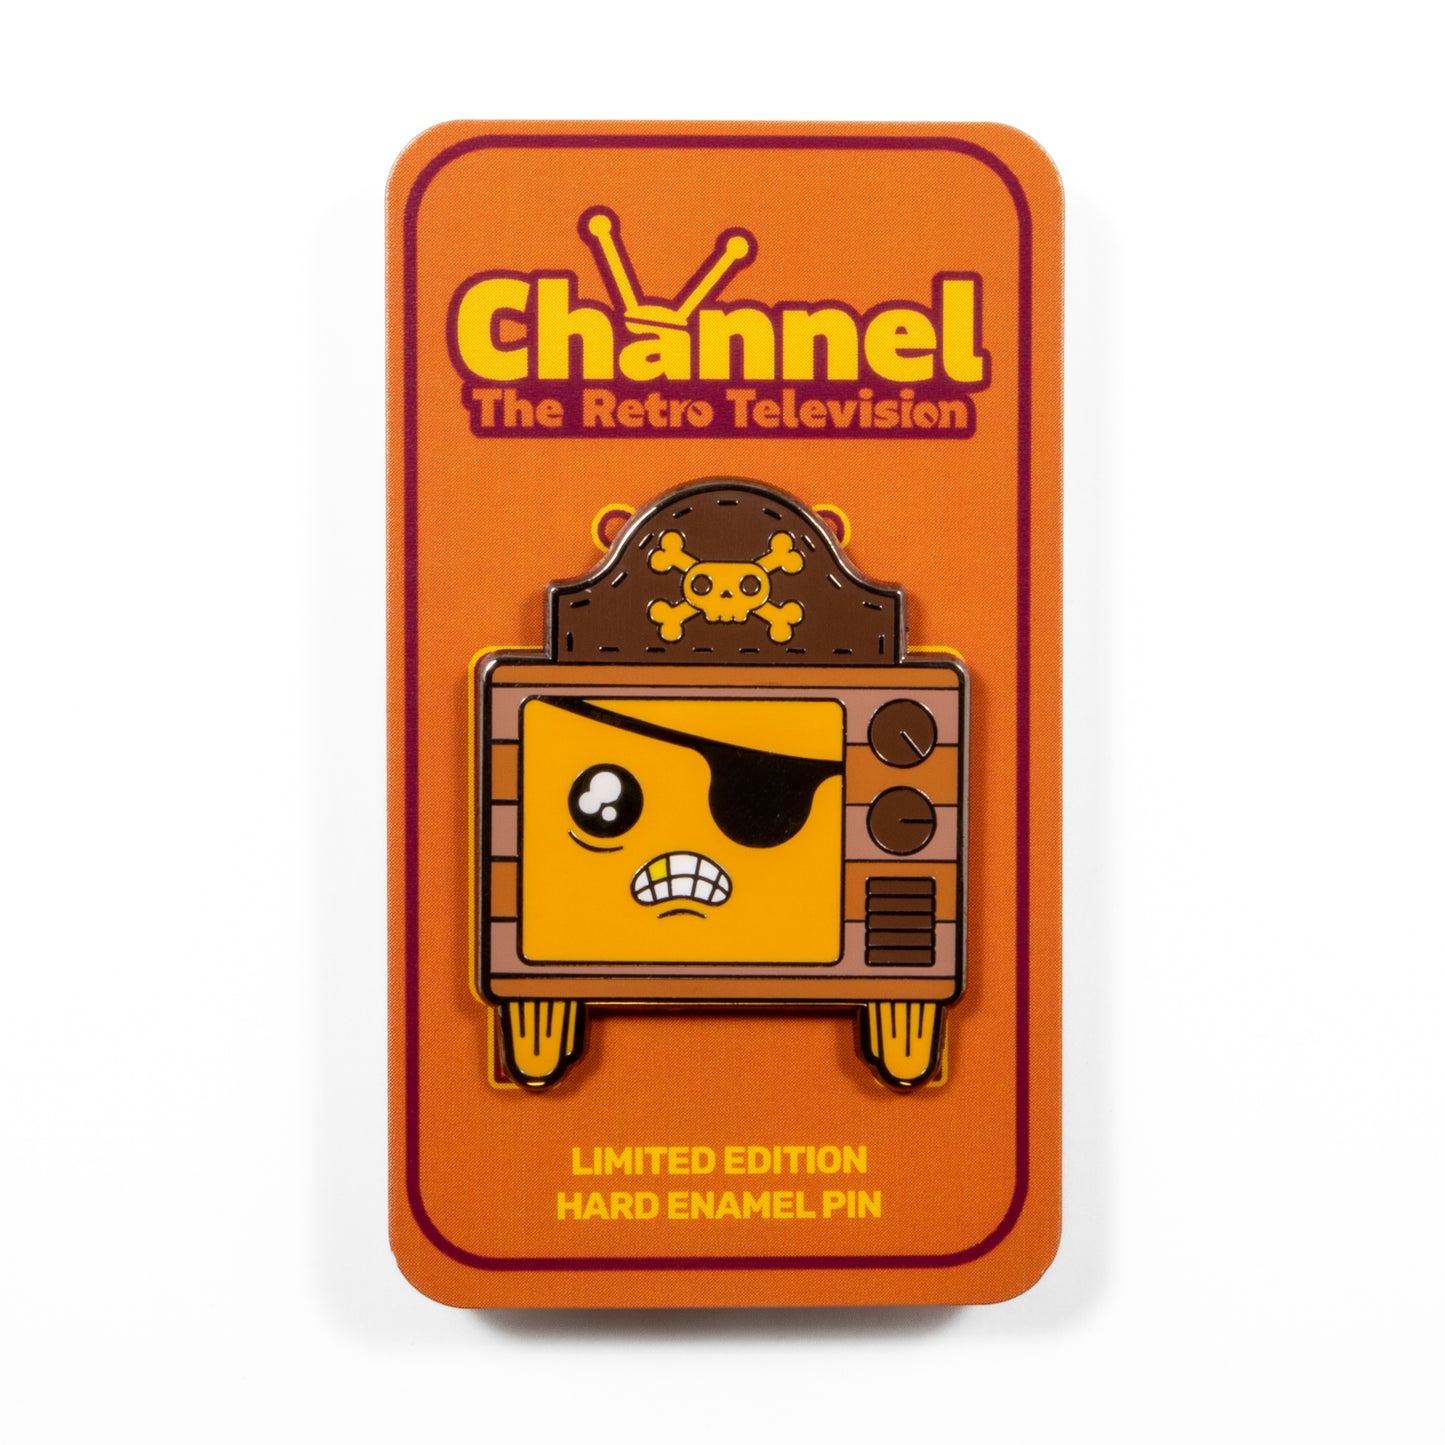 Rated Arrggh - Channel the Retro Television Enamel Pin